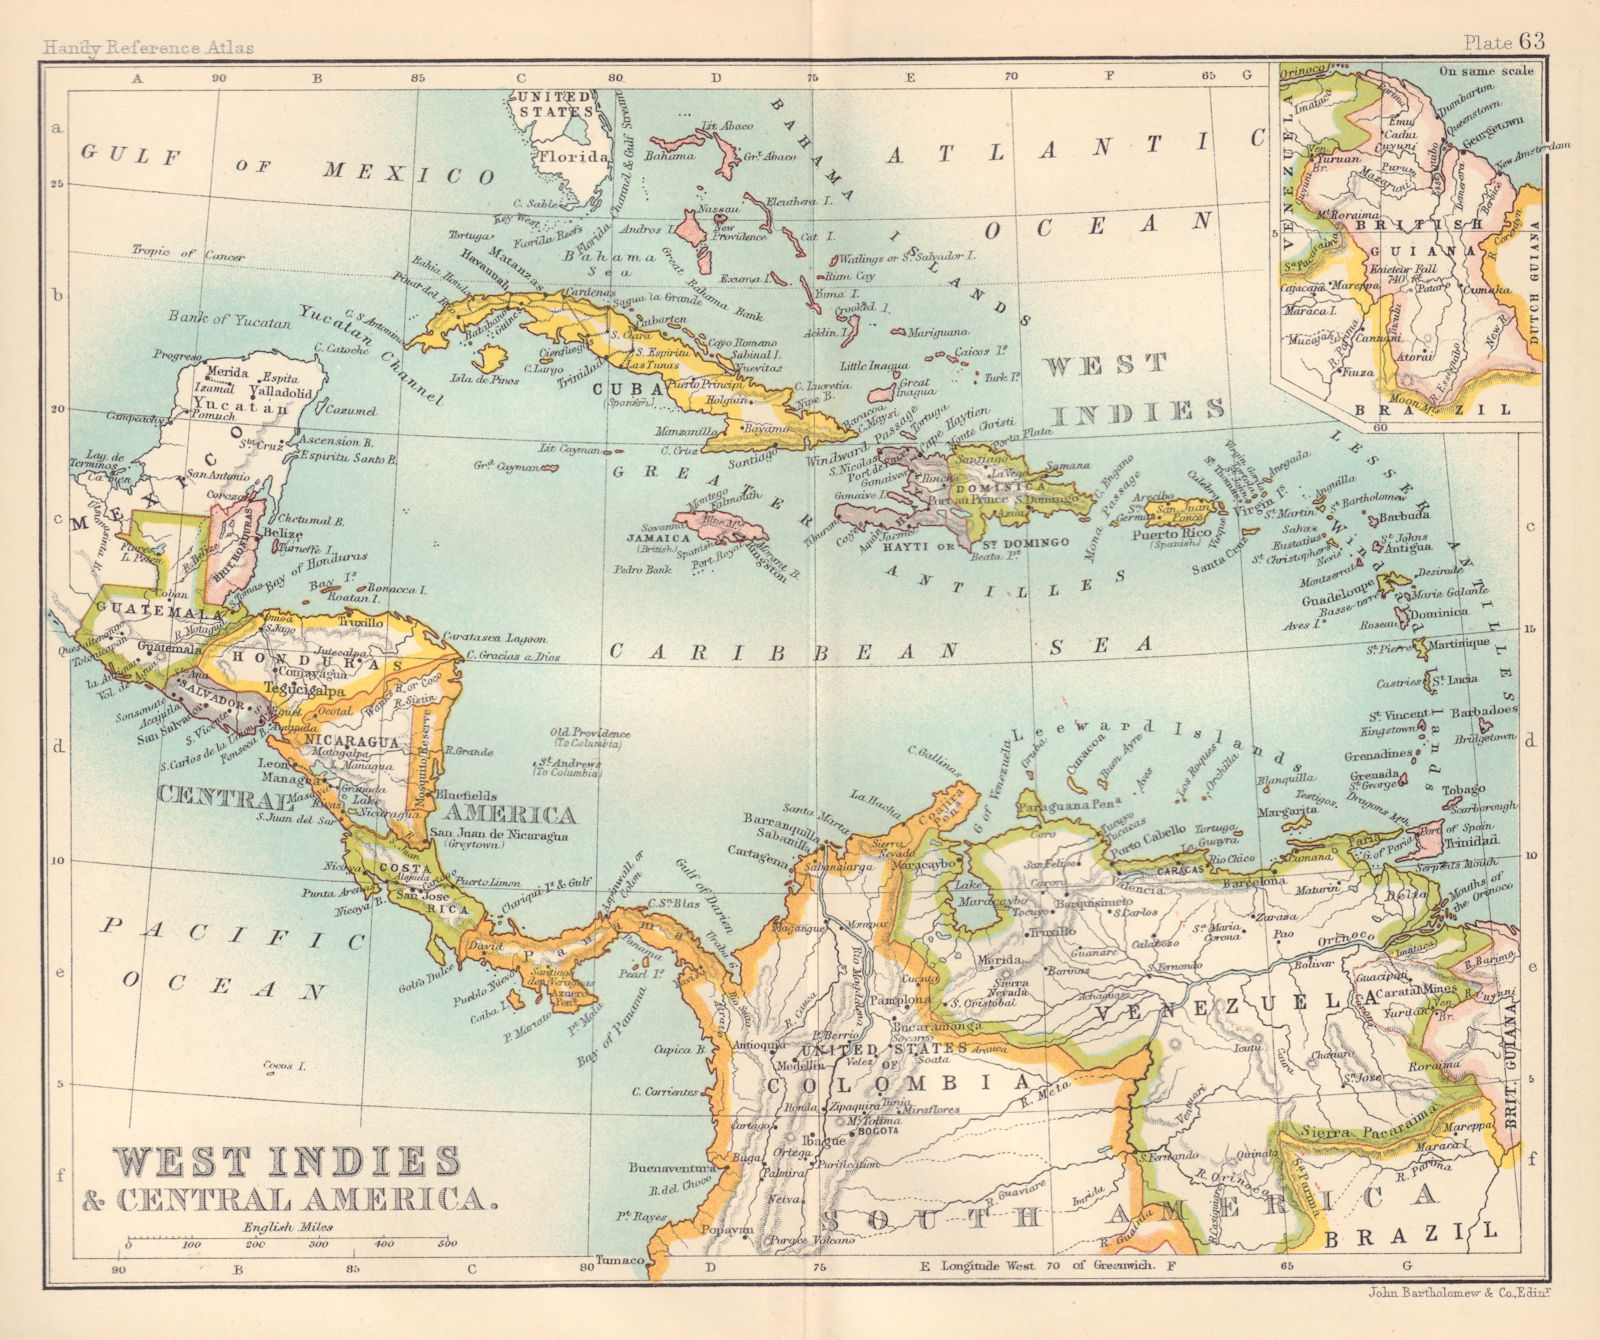 Associate Product West Indies and Central America; Inset British Guiana. Caribbean 1898 old map